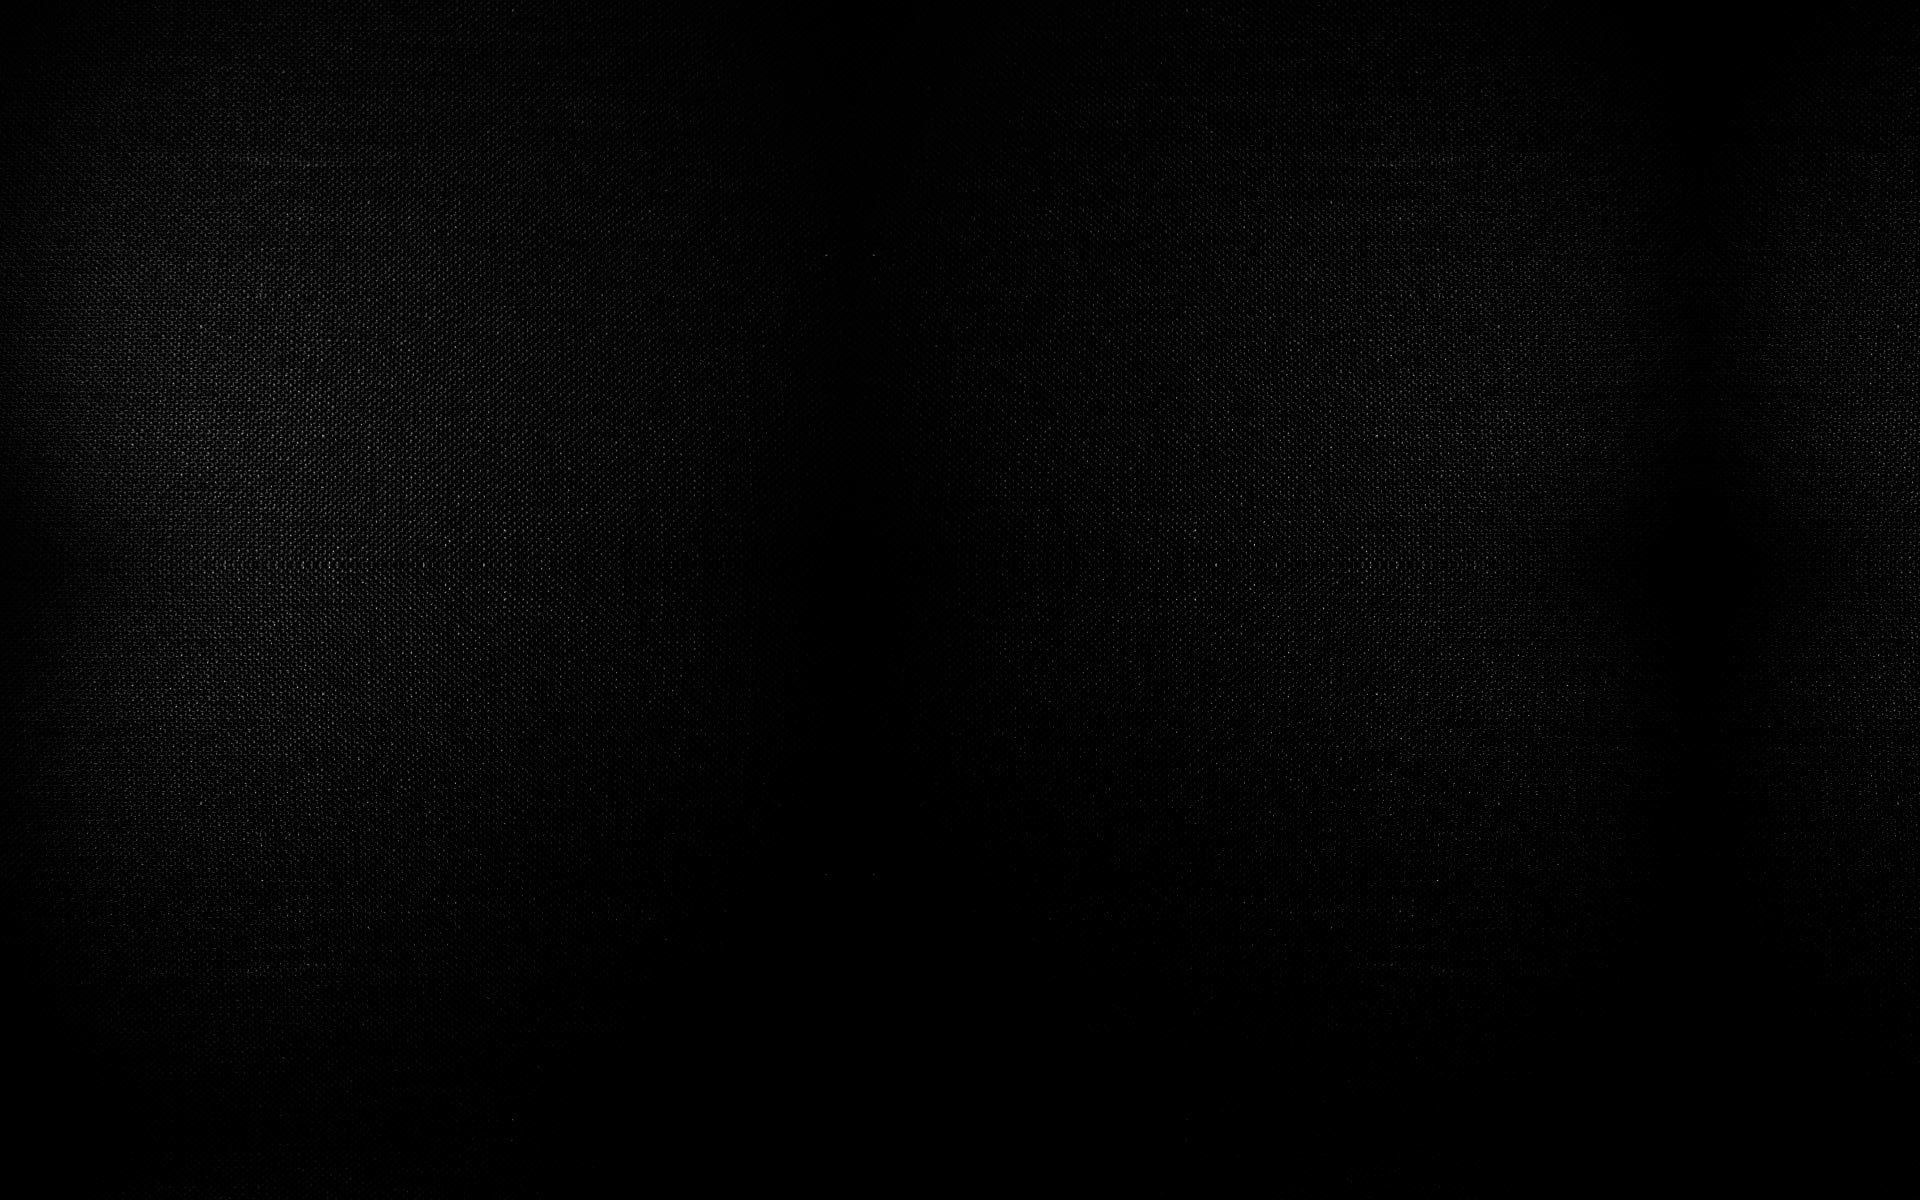 25 Excellent Black Screen Wallpaper For Desktop You Can Download It For